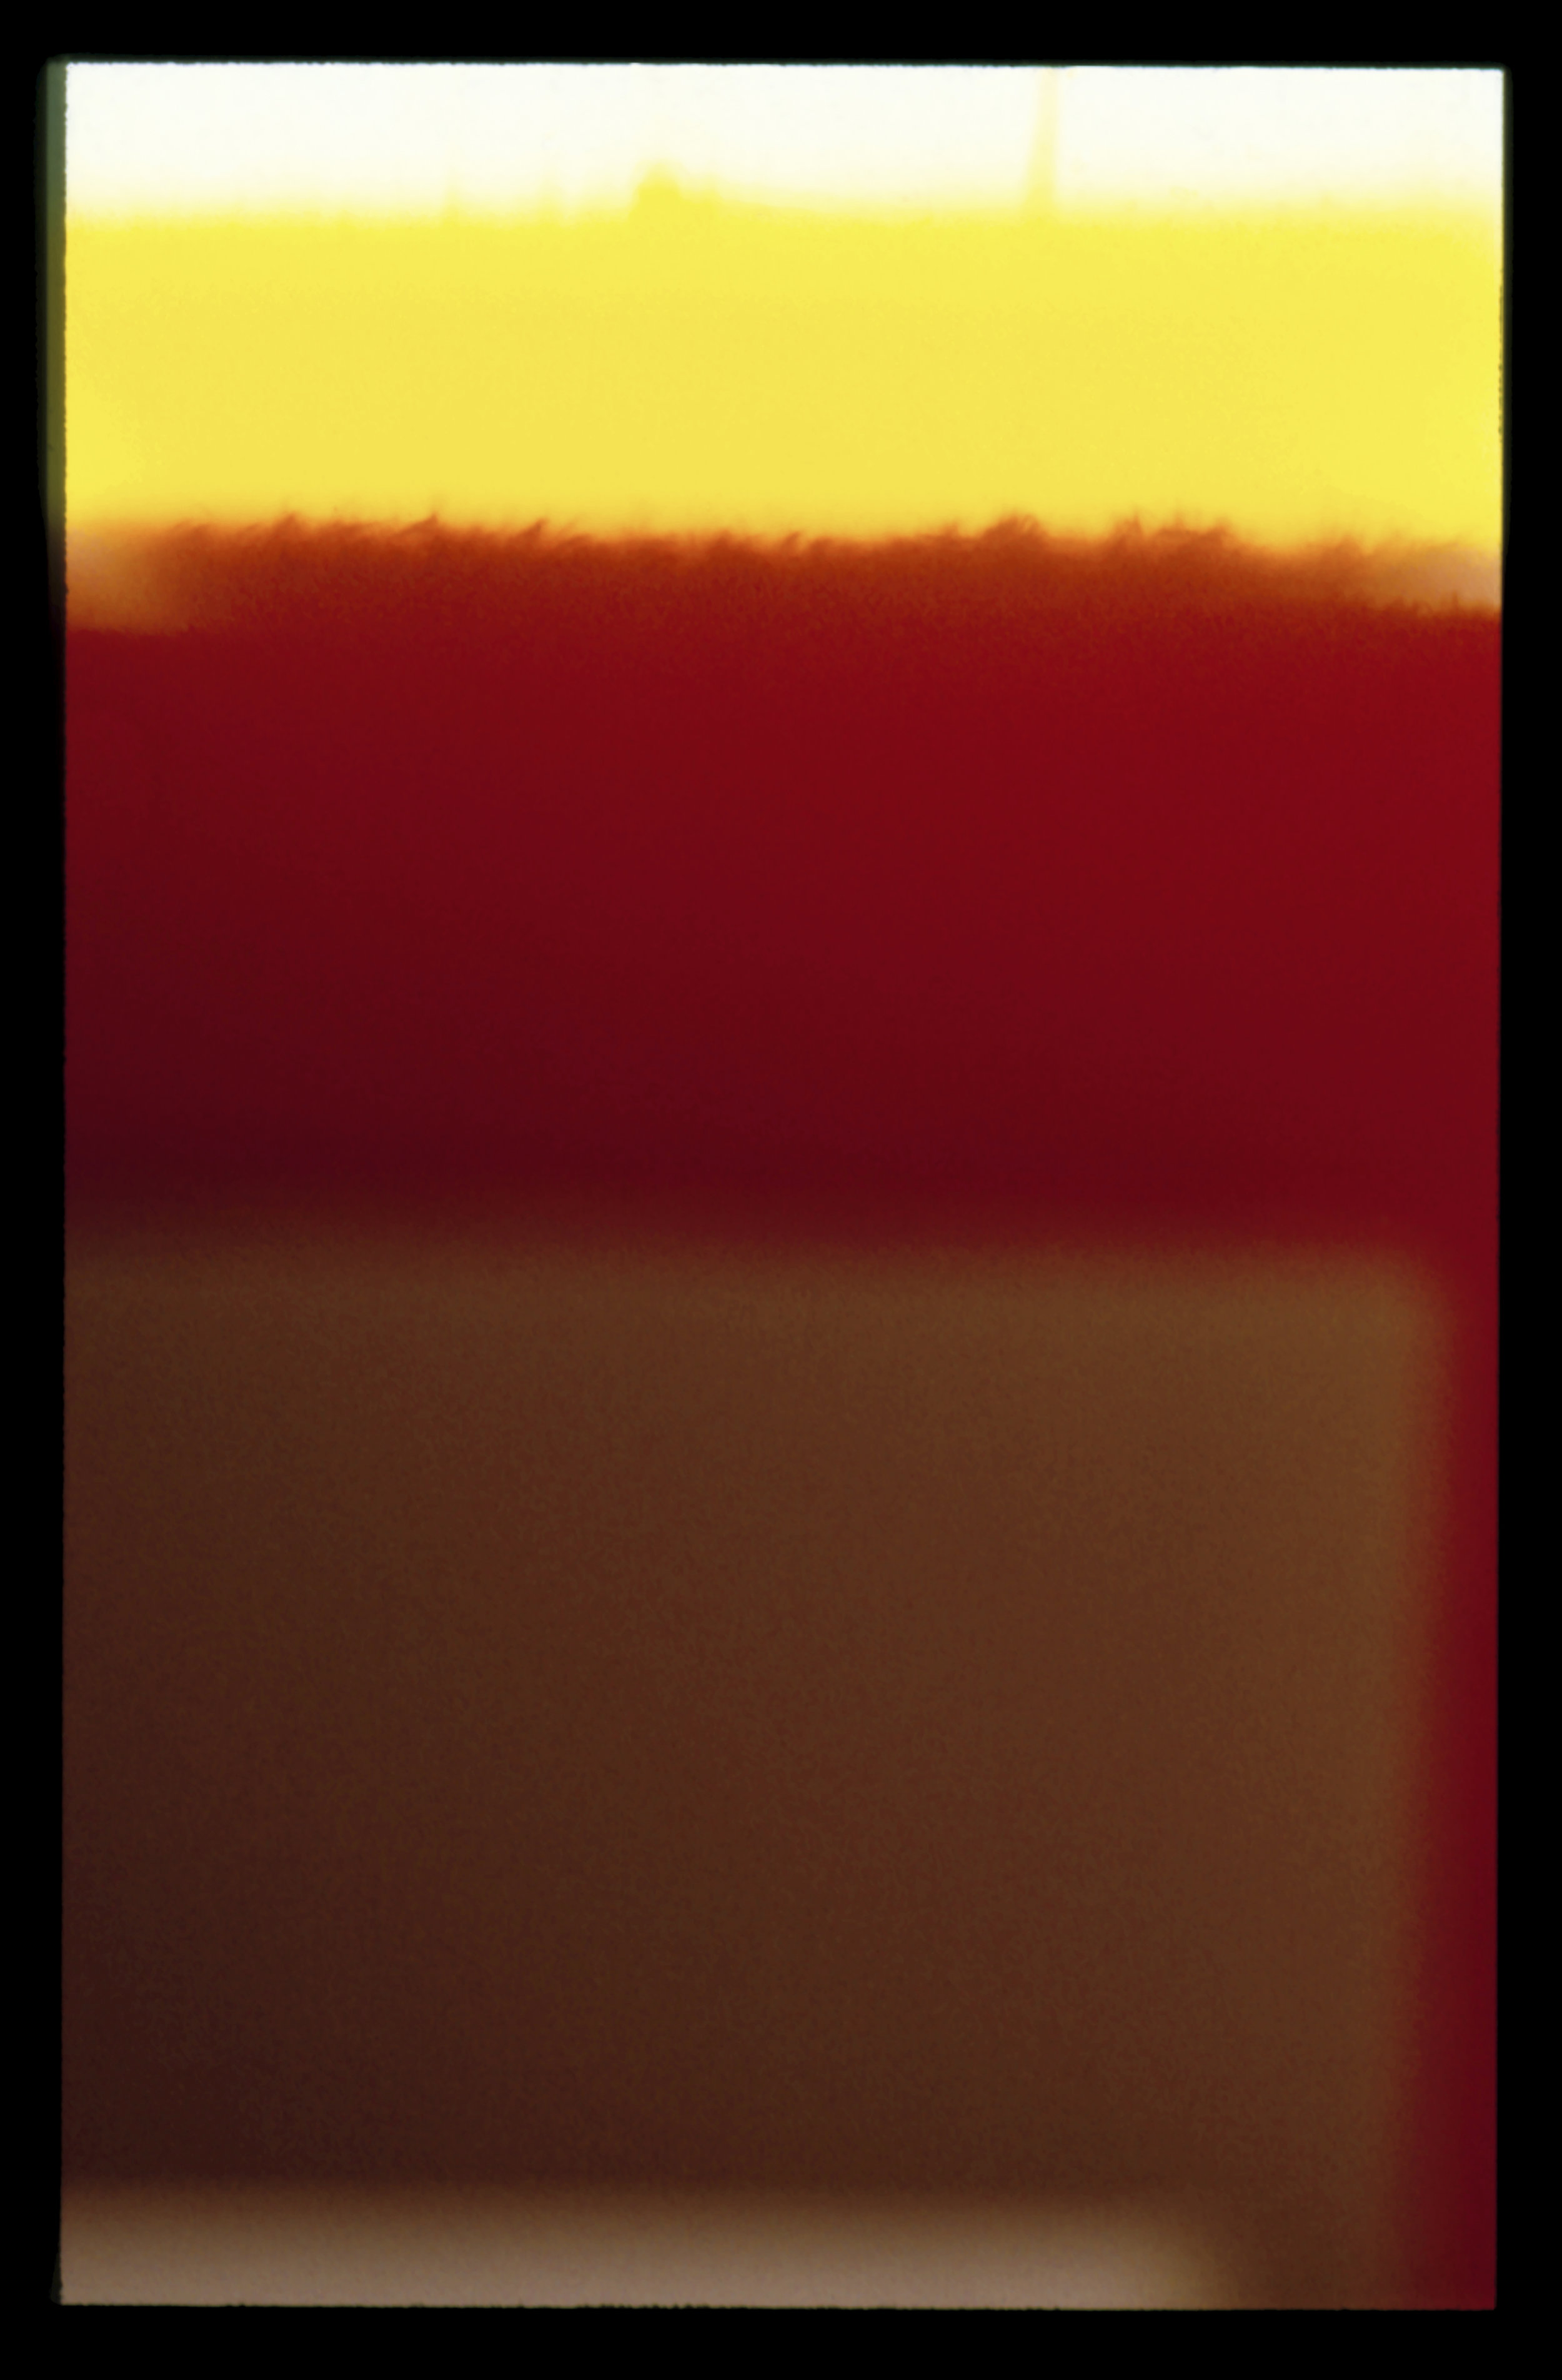 Robert Owen, Endings (Rothko died today) – Kodachrome 64, No. 21, 26/02/1970, 2009, from the series Endings, pigment ink-jet print, 80.0x52cm, Monash Gallery of Art, City of Monash Collection, courtesy of the artist and Arc One Gallery (Melbourne) 